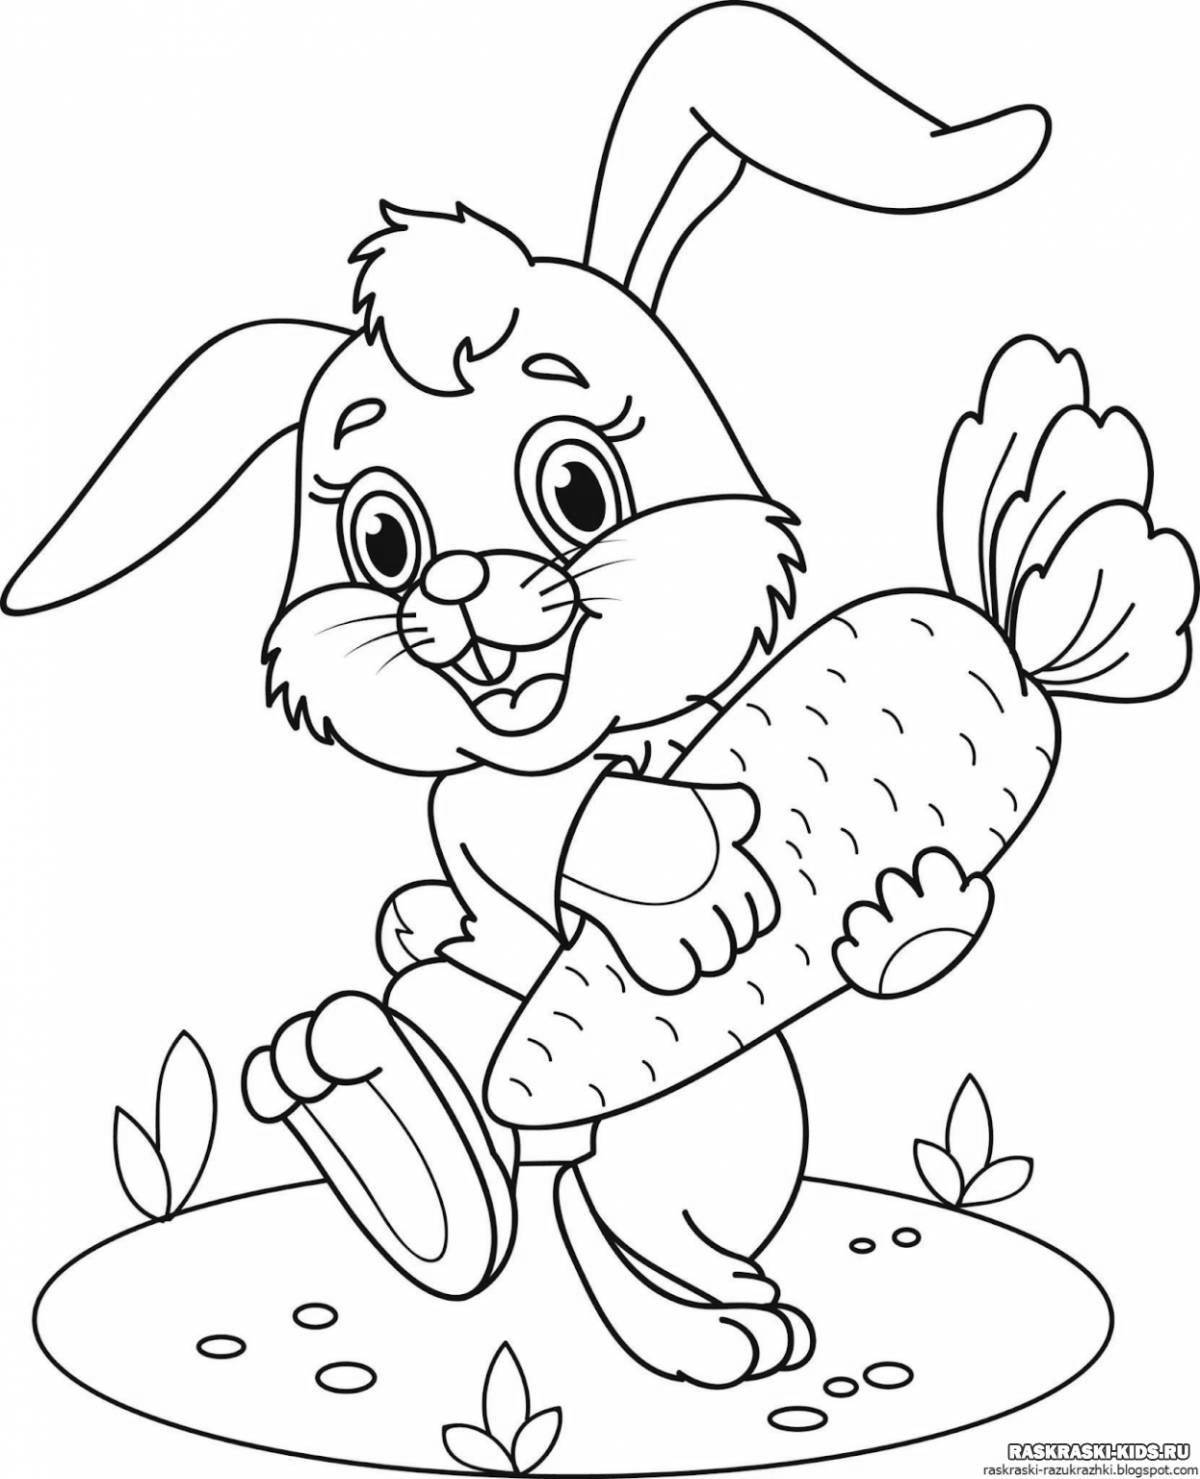 Adorable bunny coloring book with carrots